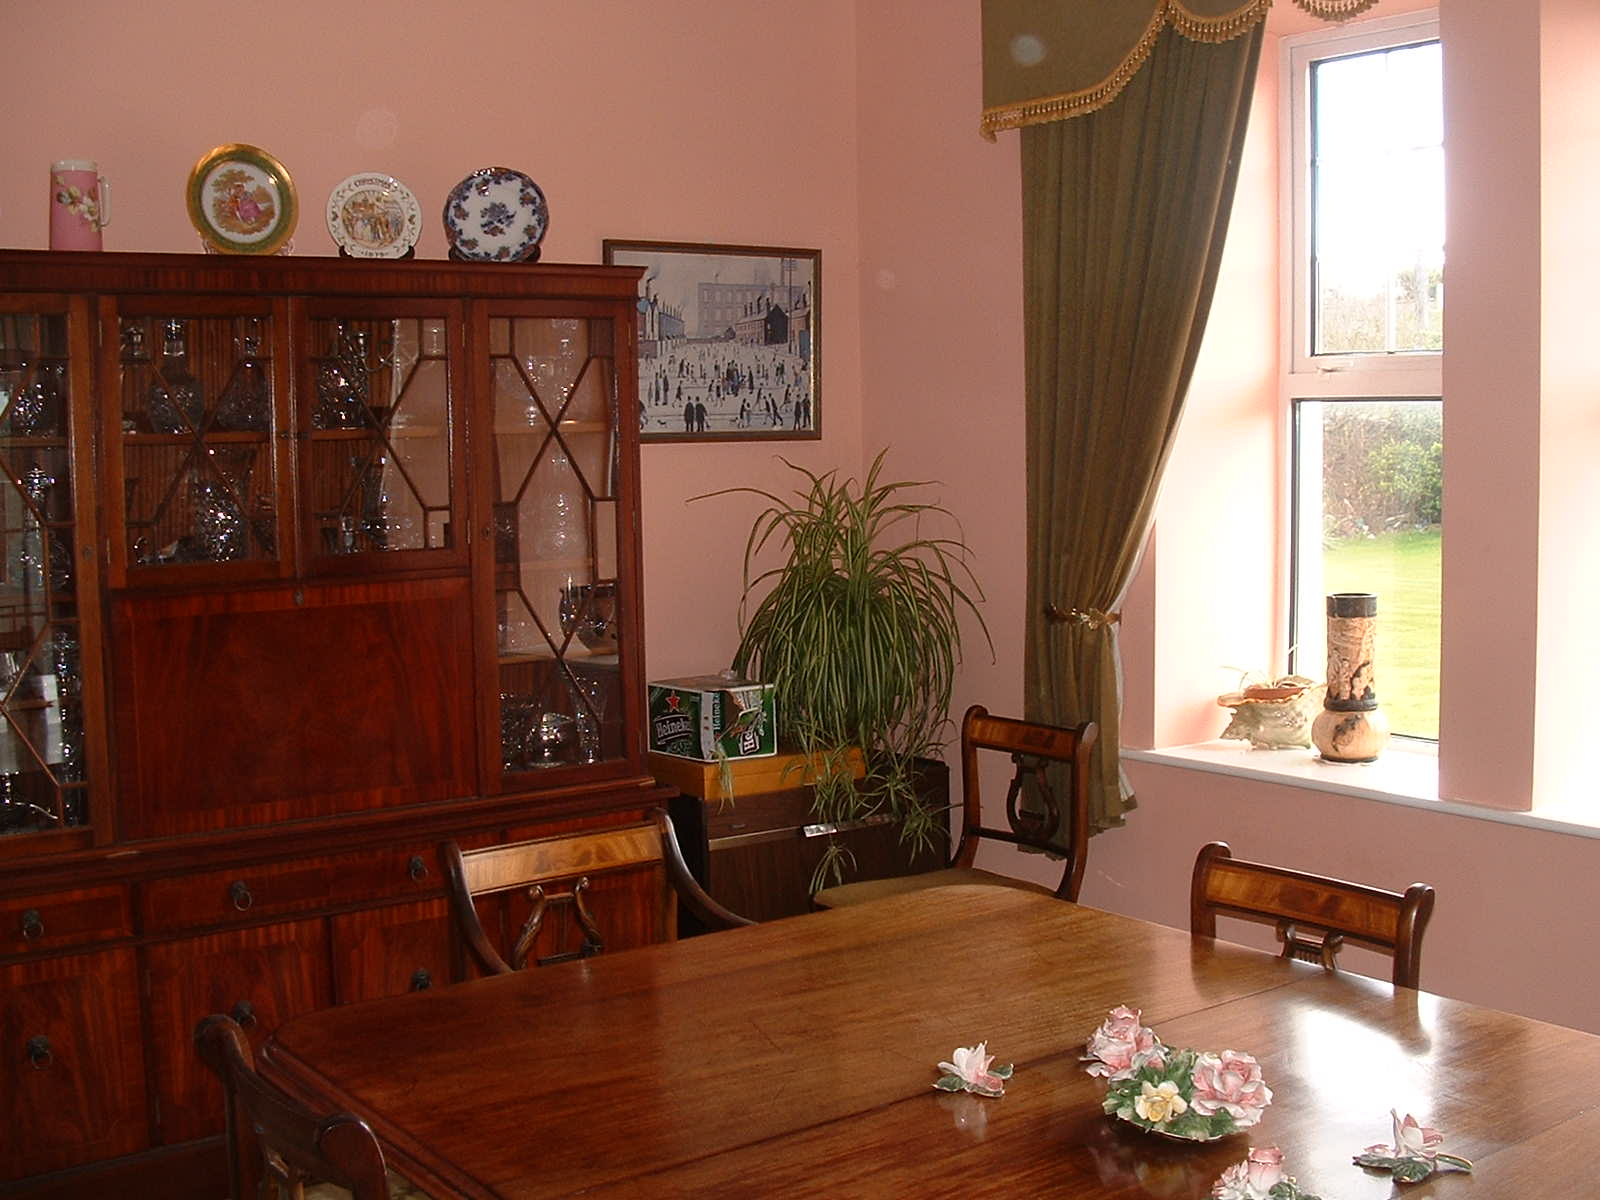 The dining room featuring a fine polished wood cabinet, table and chairs